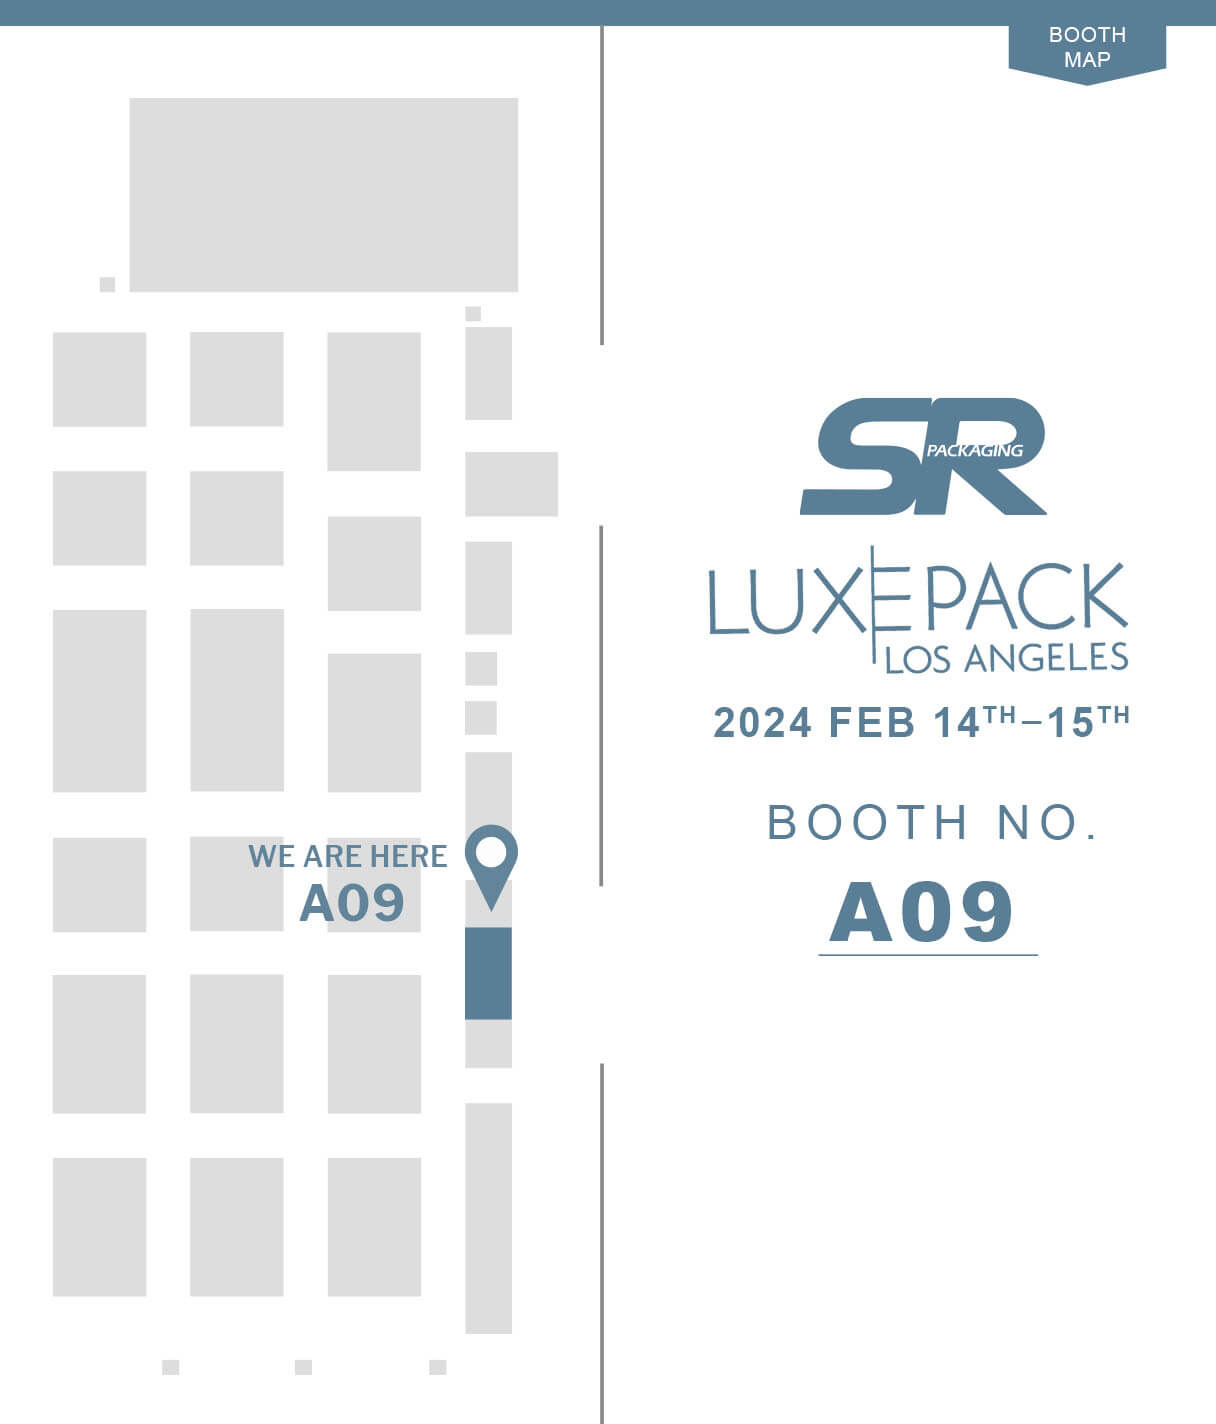 LUXE PACK LOS ANGELES 2024